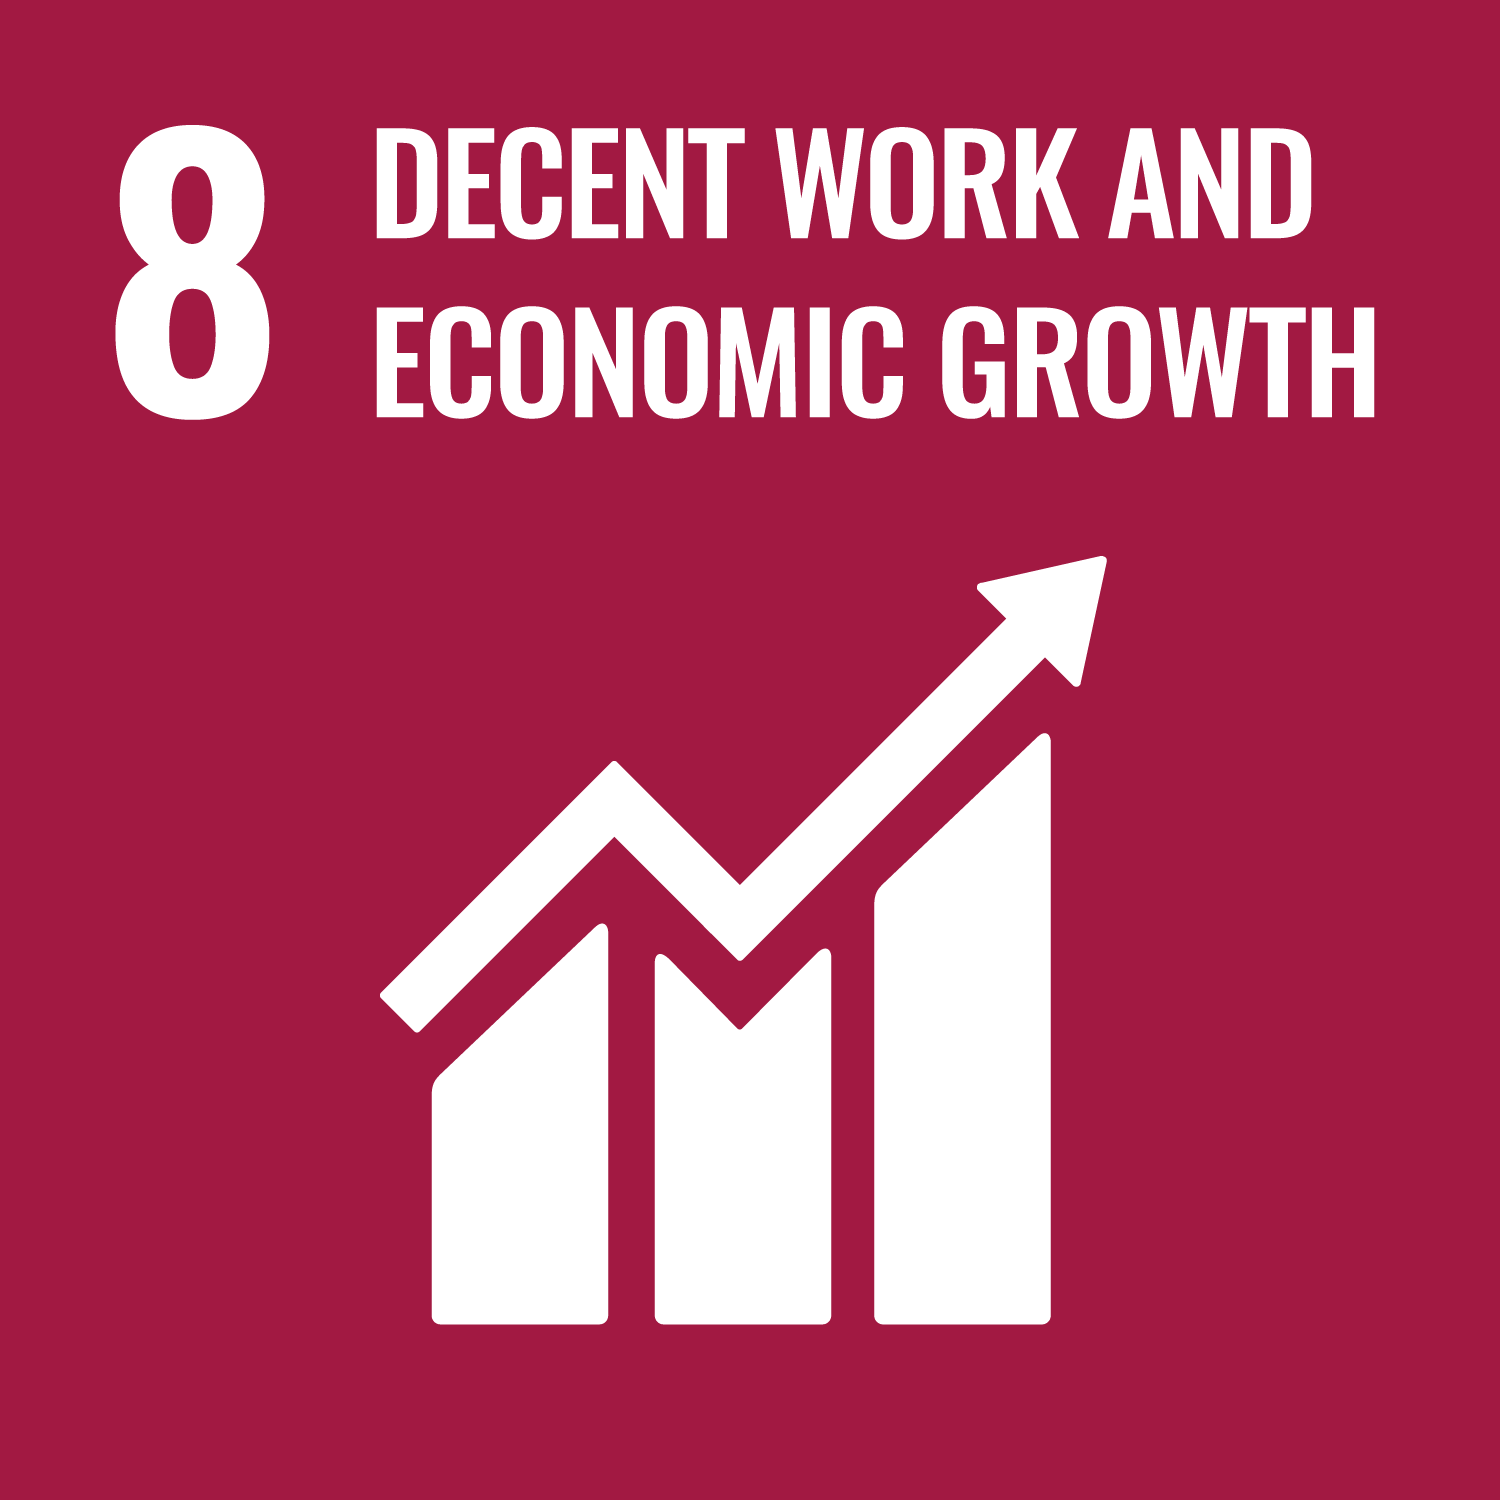 8｜DECENT WORK AND ECONOMIC GROWTH